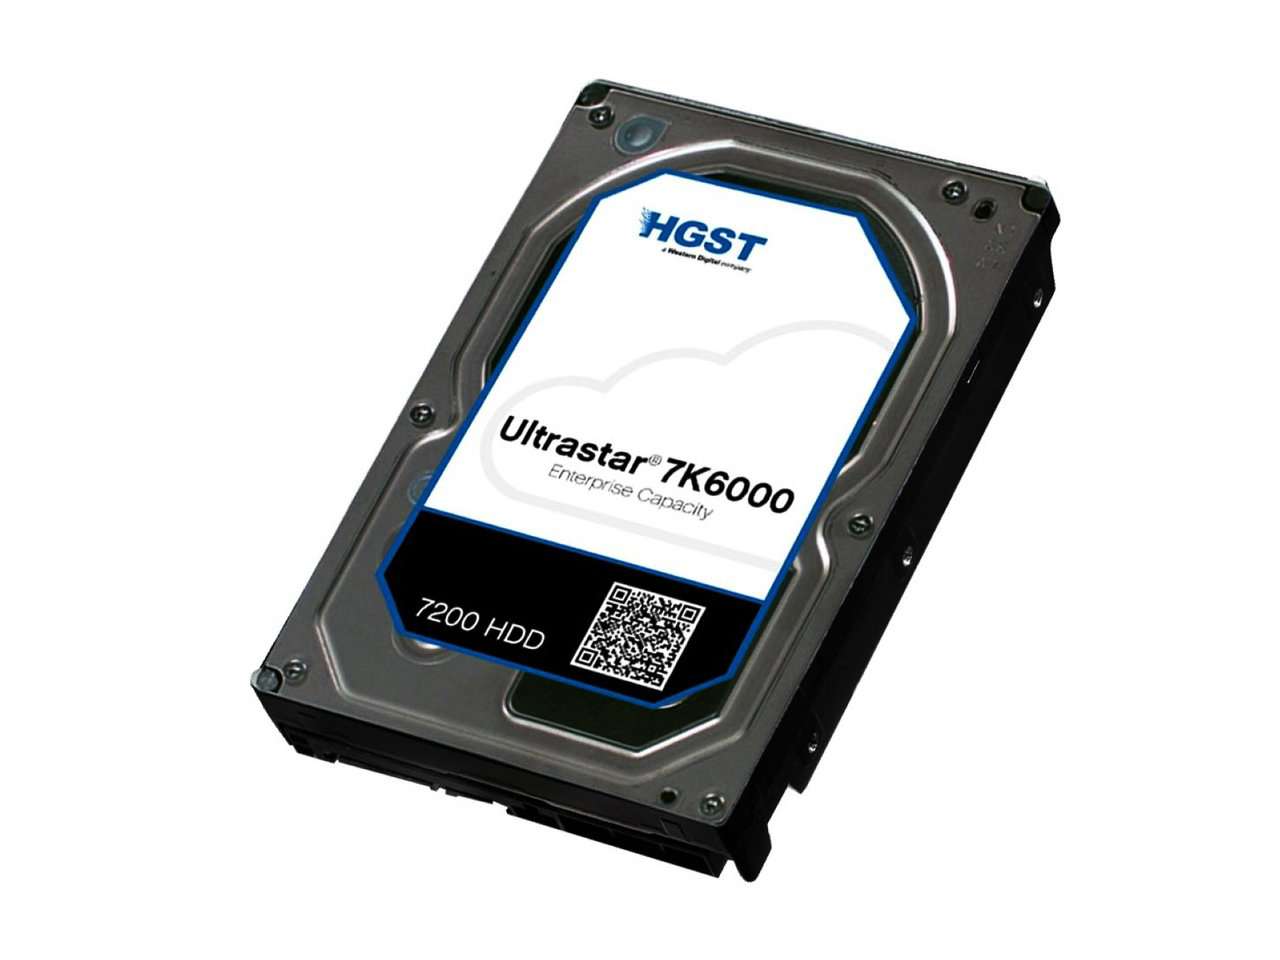 HGST Ultrastar 7K6000 0F22802  HUS726050AL4211 5TB 7.2K RPM SAS 12Gb/s 4Kn 128MB Cache 3.5" TCG Manufacturer Recertified HDD